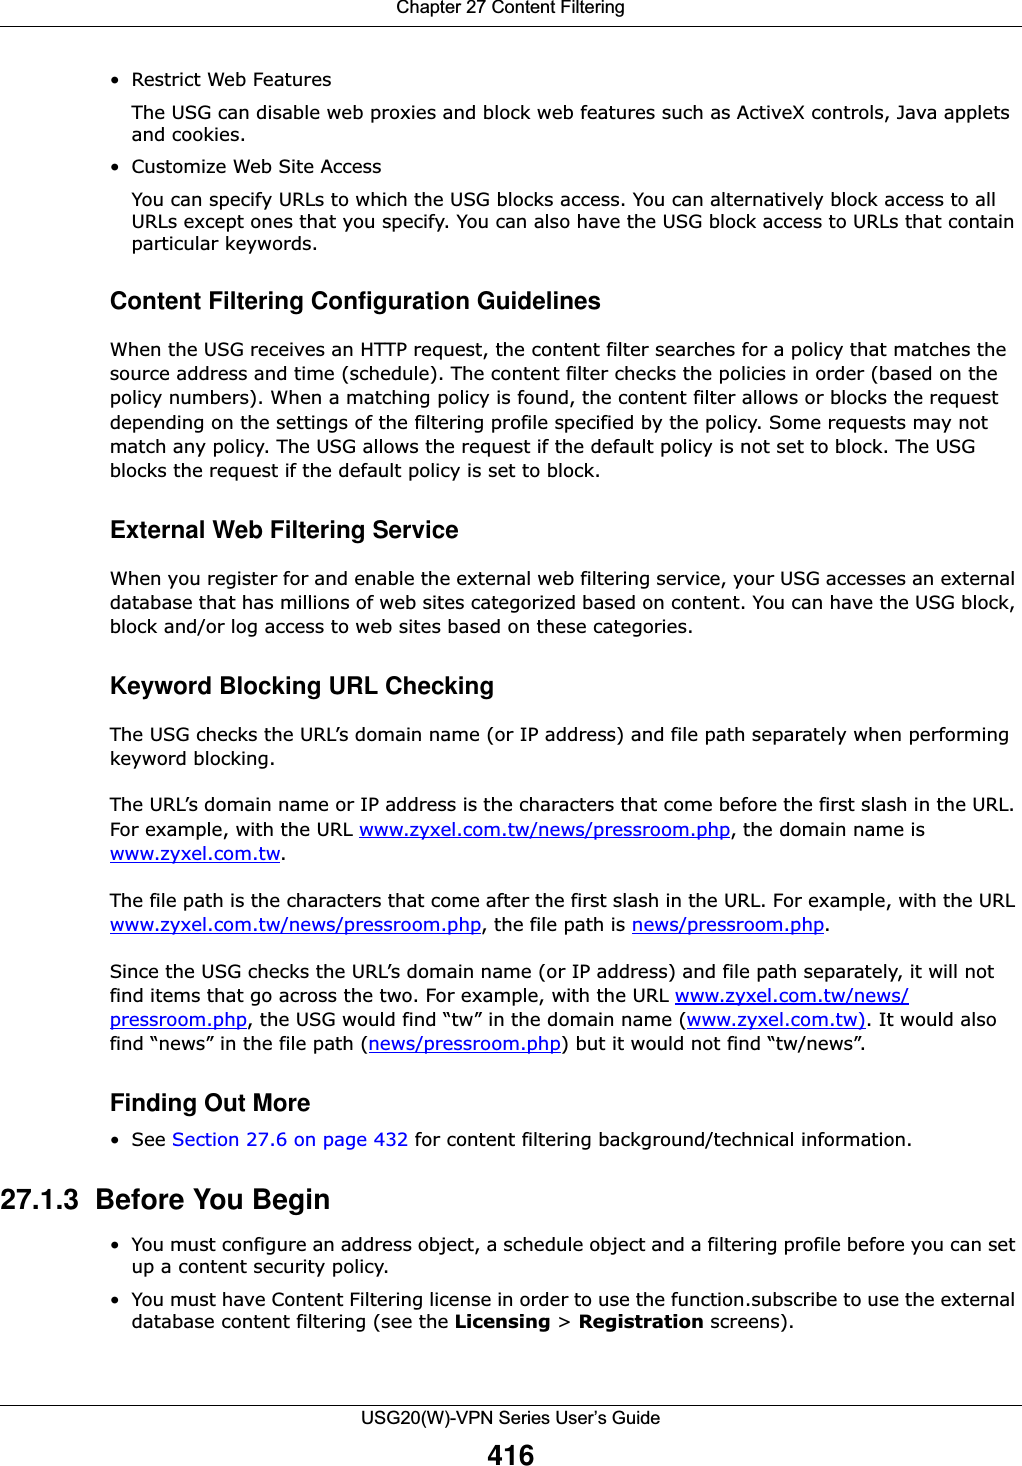 Chapter 27 Content FilteringUSG20(W)-VPN Series User’s Guide416• Restrict Web FeaturesThe USG can disable web proxies and block web features such as ActiveX controls, Java applets and cookies.• Customize Web Site Access You can specify URLs to which the USG blocks access. You can alternatively block access to all URLs except ones that you specify. You can also have the USG block access to URLs that contain particular keywords. Content Filtering Configuration GuidelinesWhen the USG receives an HTTP request, the content filter searches for a policy that matches the source address and time (schedule). The content filter checks the policies in order (based on the policy numbers). When a matching policy is found, the content filter allows or blocks the request depending on the settings of the filtering profile specified by the policy. Some requests may not match any policy. The USG allows the request if the default policy is not set to block. The USG blocks the request if the default policy is set to block.External Web Filtering Service When you register for and enable the external web filtering service, your USG accesses an external database that has millions of web sites categorized based on content. You can have the USG block, block and/or log access to web sites based on these categories. Keyword Blocking URL CheckingThe USG checks the URL’s domain name (or IP address) and file path separately when performing keyword blocking. The URL’s domain name or IP address is the characters that come before the first slash in the URL. For example, with the URL www.zyxel.com.tw/news/pressroom.php, the domain name is www.zyxel.com.tw.The file path is the characters that come after the first slash in the URL. For example, with the URL www.zyxel.com.tw/news/pressroom.php, the file path is news/pressroom.php.Since the USG checks the URL’s domain name (or IP address) and file path separately, it will not find items that go across the two. For example, with the URL www.zyxel.com.tw/news/pressroom.php, the USG would find “tw” in the domain name (www.zyxel.com.tw). It would also find “news” in the file path (news/pressroom.php) but it would not find “tw/news”.Finding Out More•See Section 27.6 on page 432 for content filtering background/technical information.27.1.3  Before You Begin• You must configure an address object, a schedule object and a filtering profile before you can set up a content security policy.• You must have Content Filtering license in order to use the function.subscribe to use the external database content filtering (see the Licensing &gt; Registration screens).